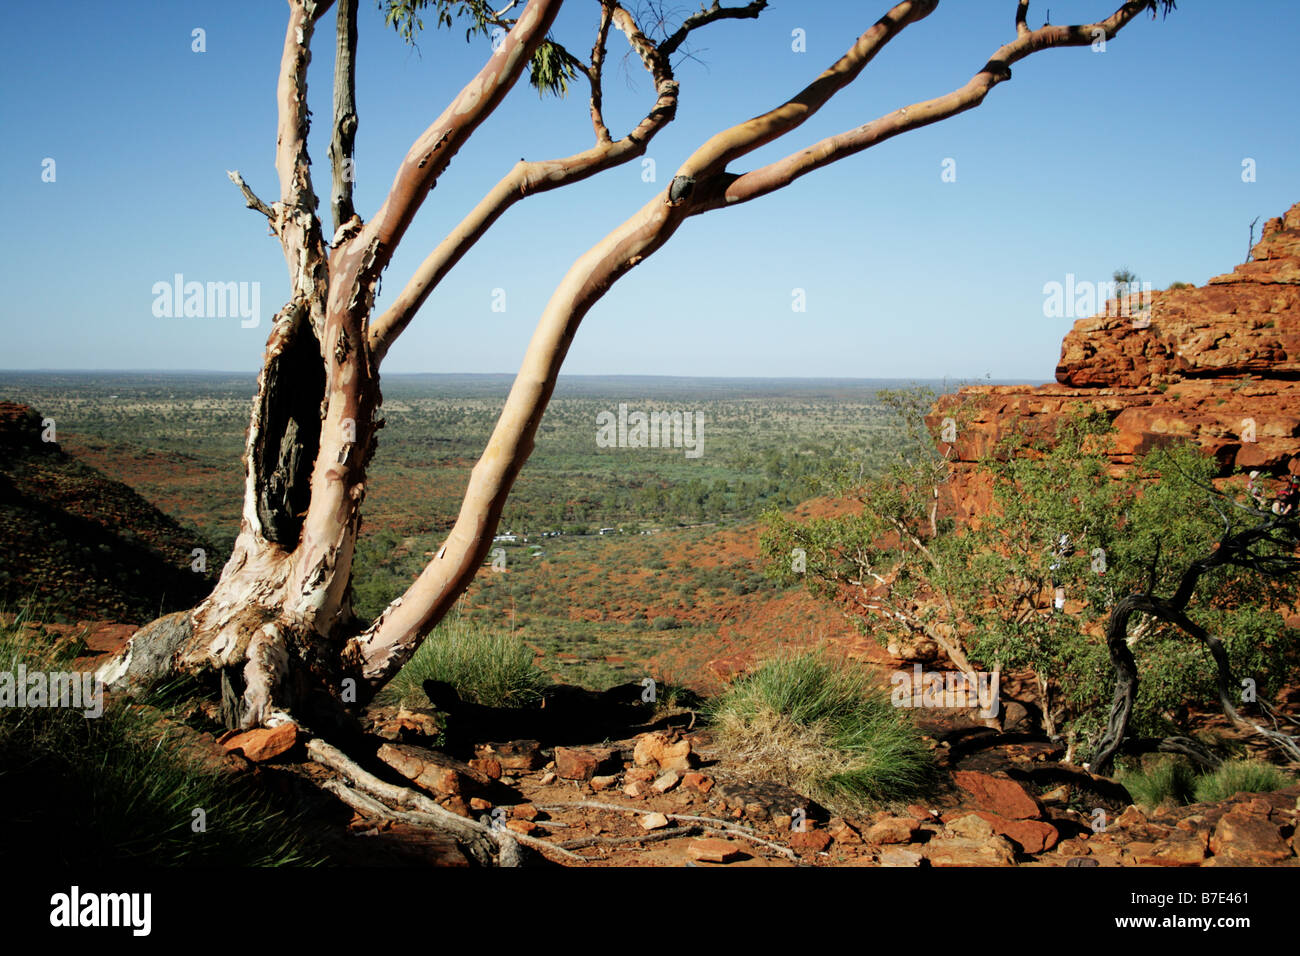 A daytime photograph of a tree in Kings Canyon, in the Outback, Australia Stock Photo